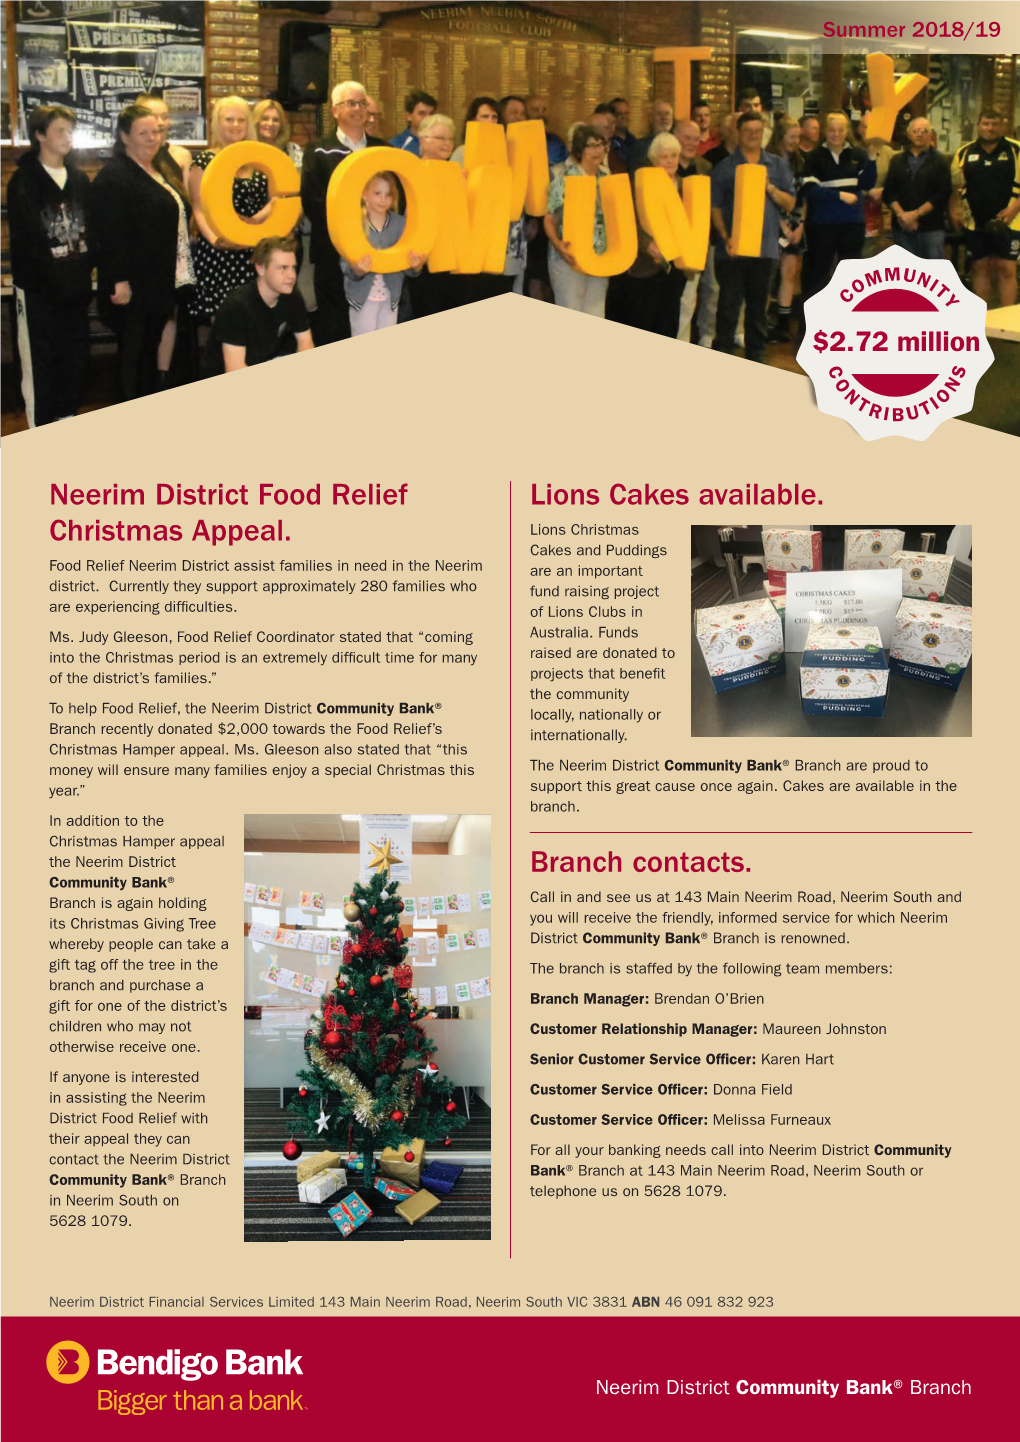 Neerim District Food Relief Christmas Appeal. Lions Cakes Available